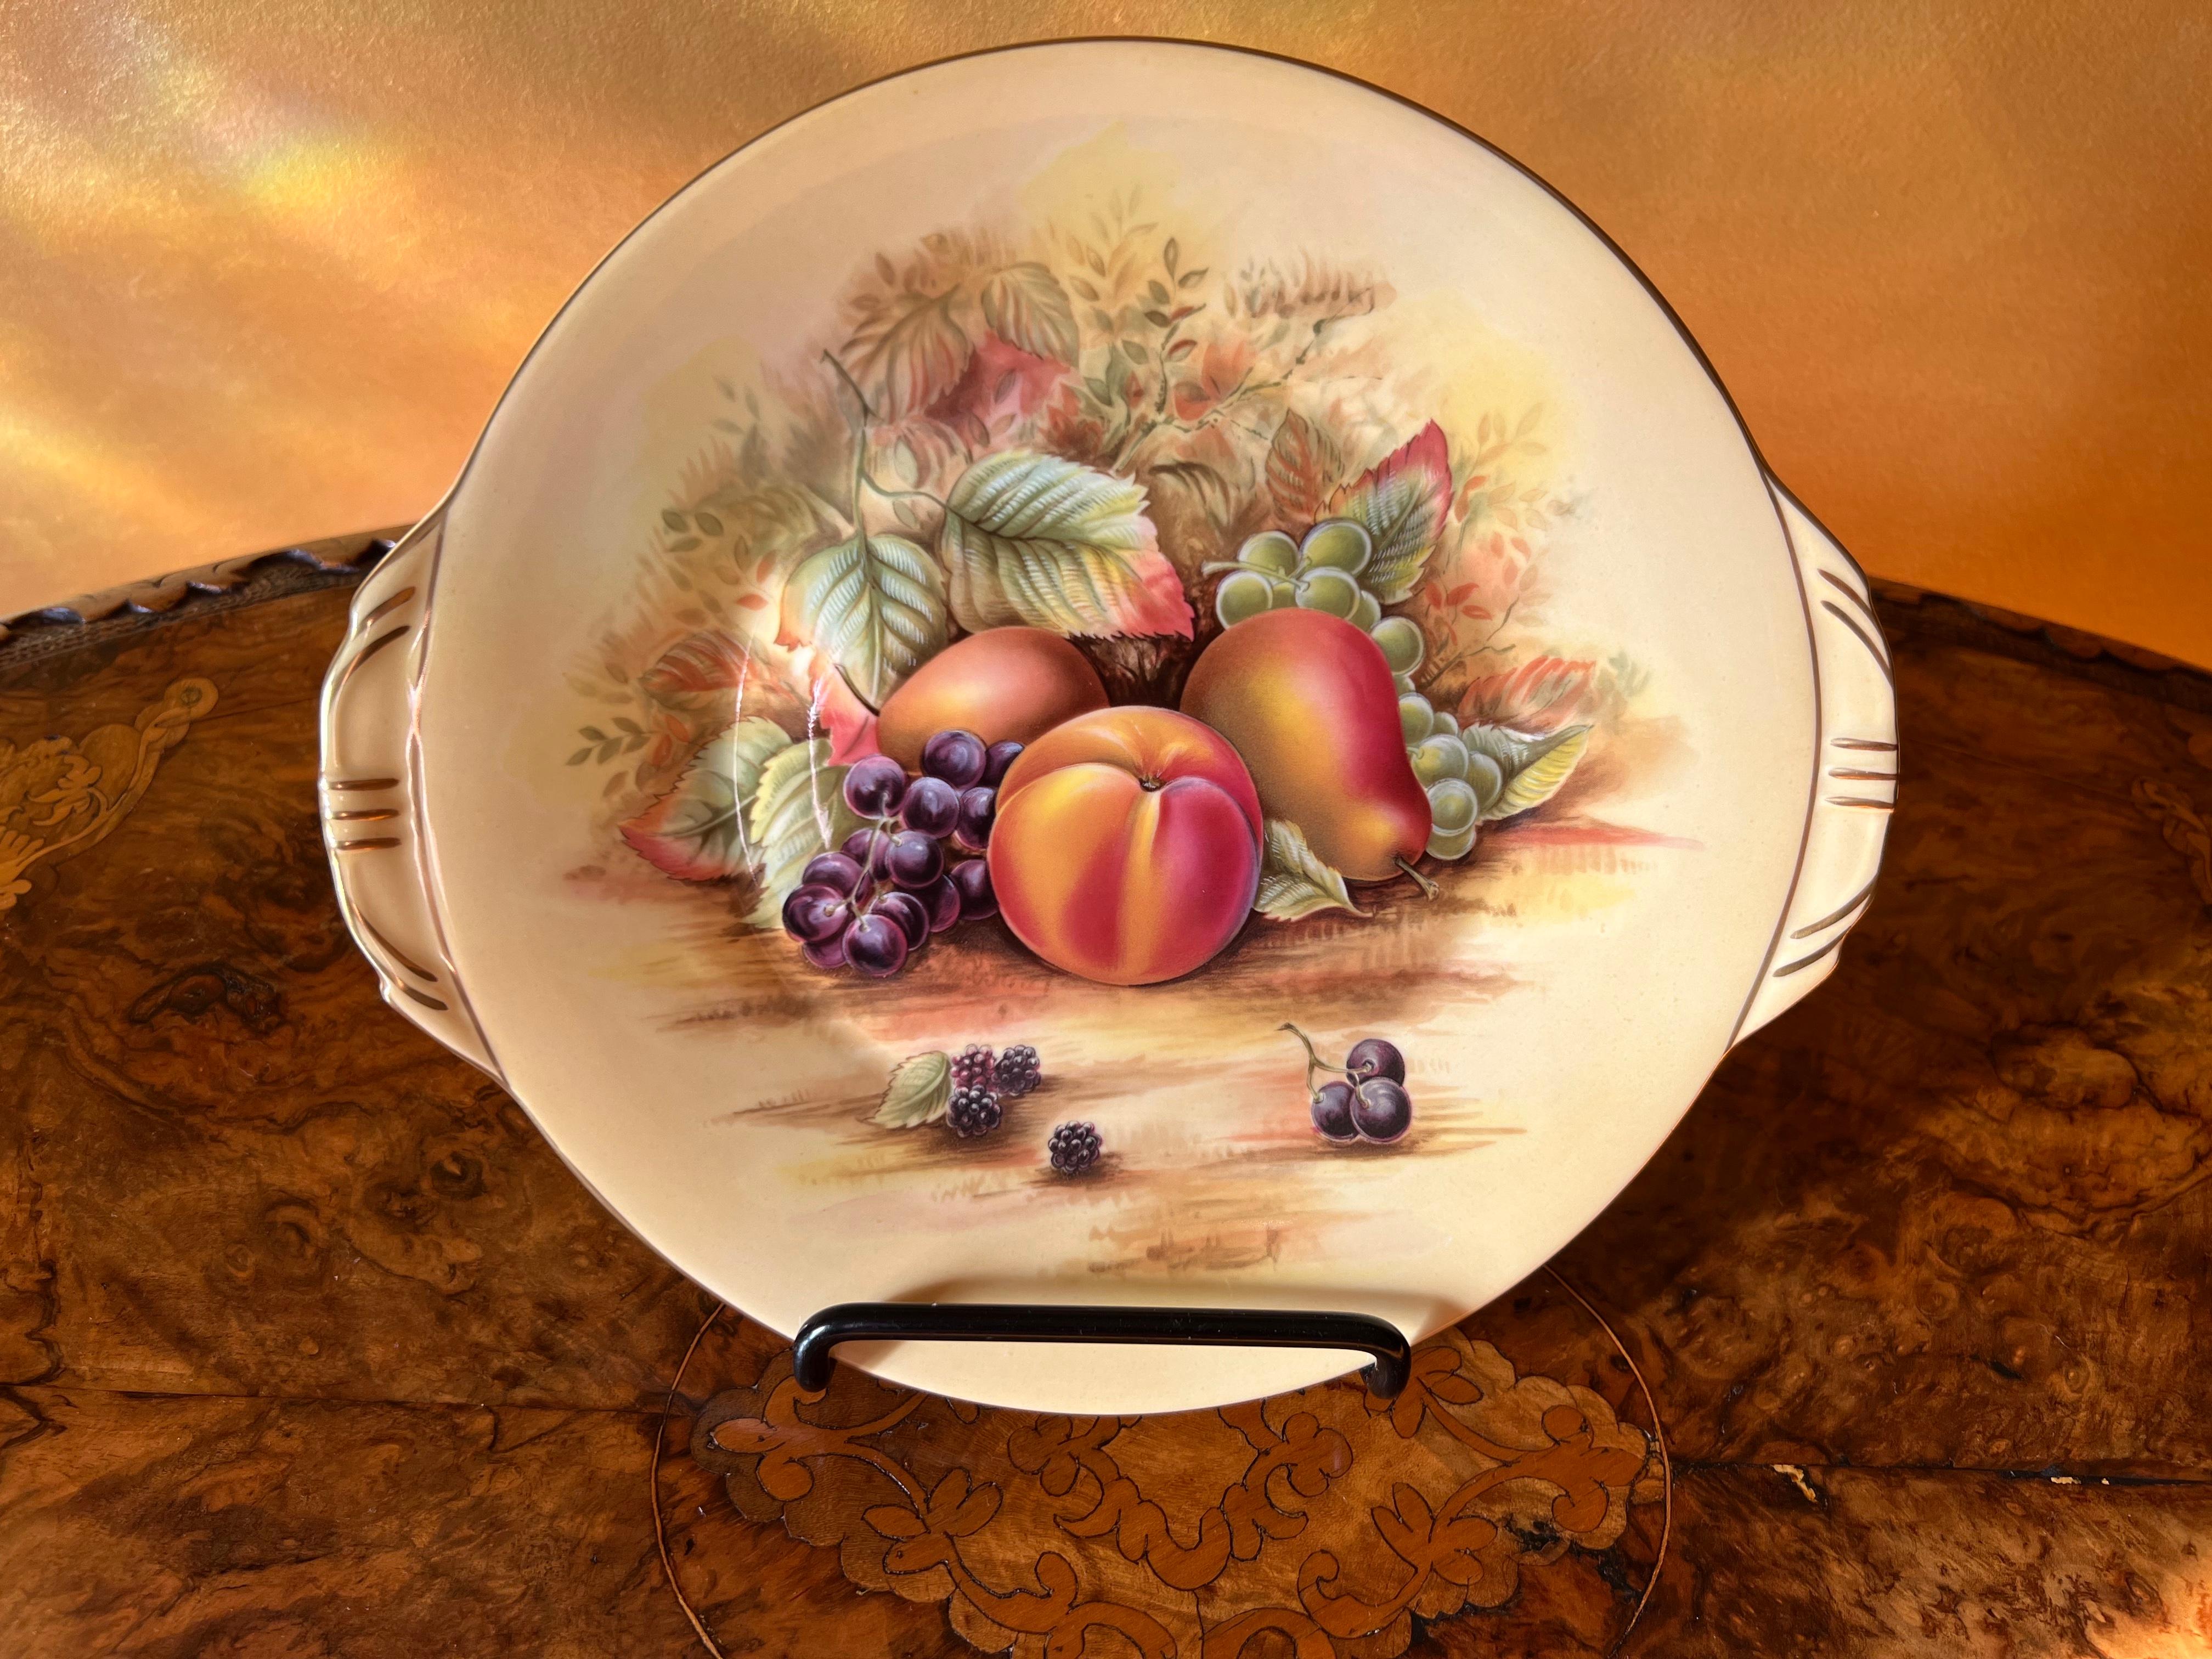 Fruit design print front, with gold edge time, side wings on plate.

Material: Bone China

Country of Origin: England

Measurements: 22.5cm width, 25cm length.